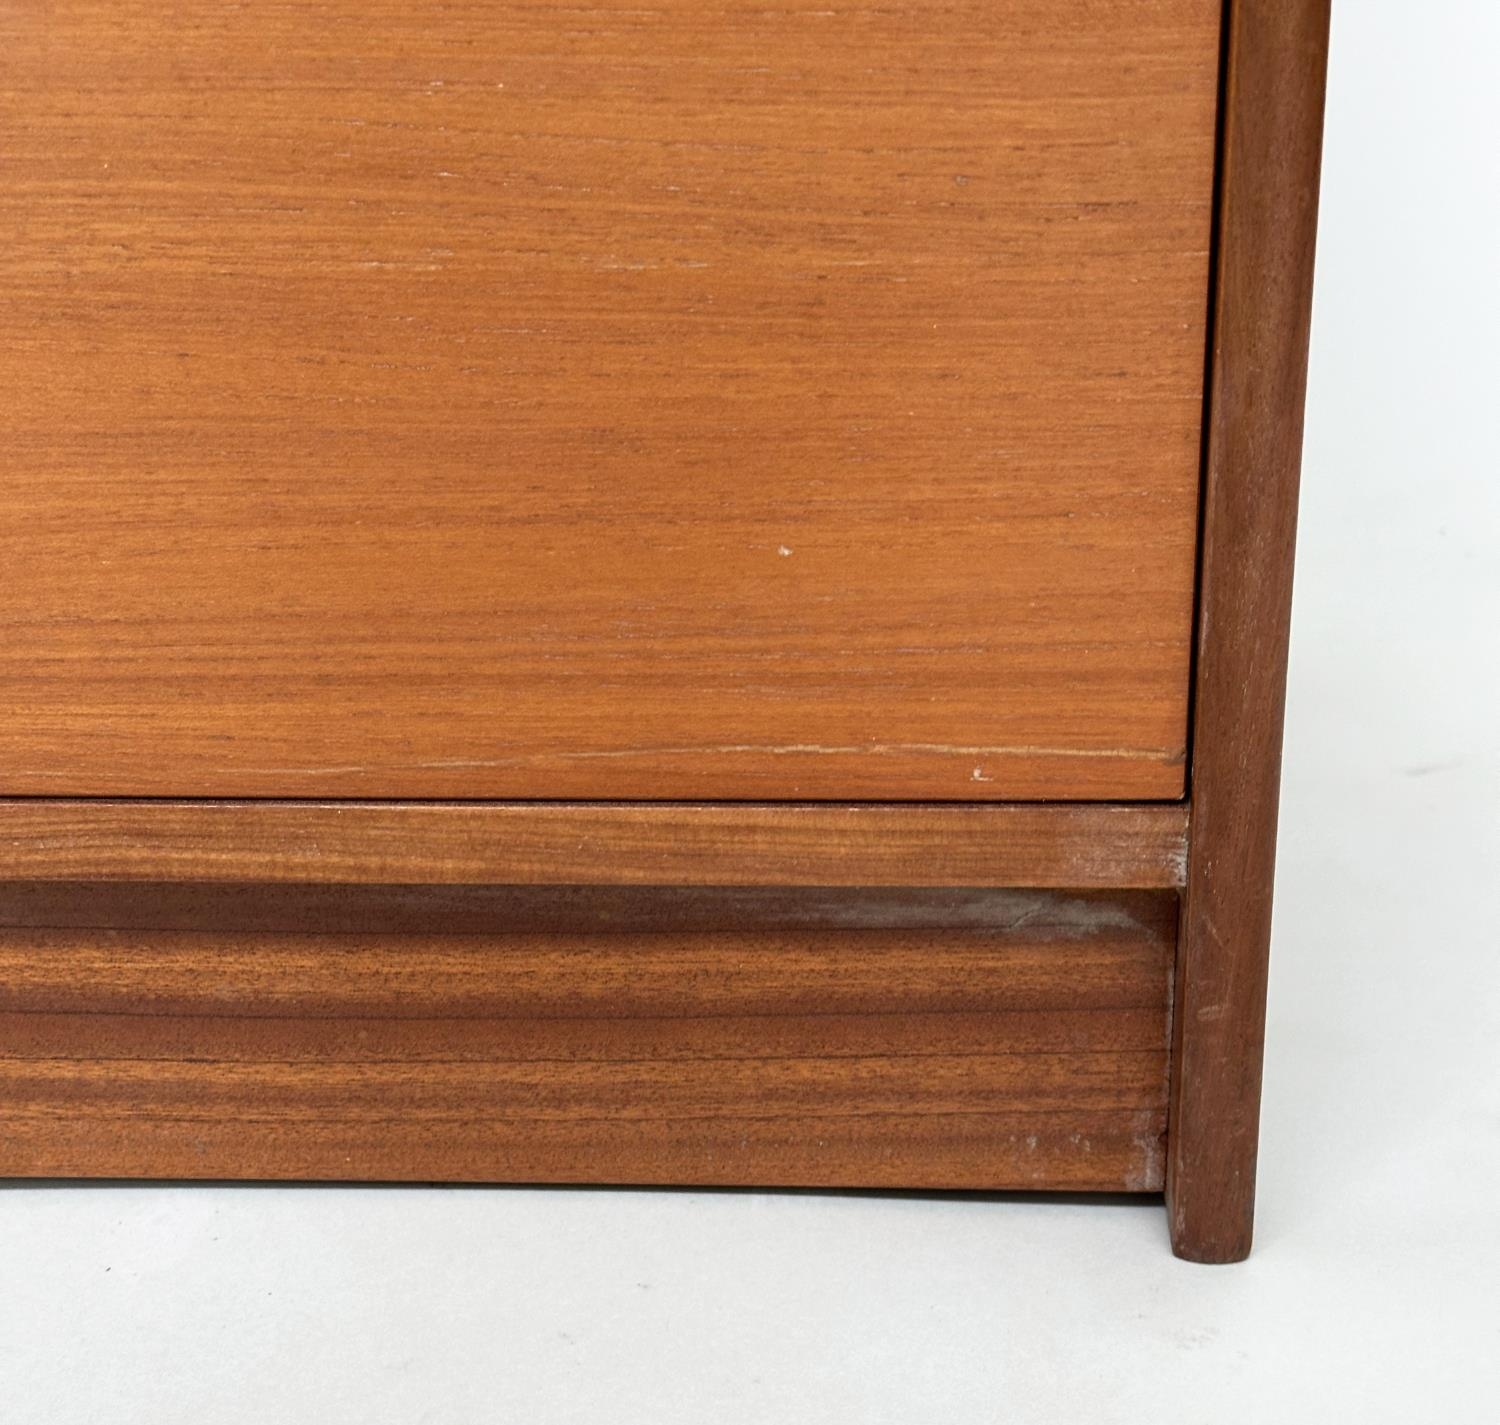 TALL CHEST, 1970s teak with five long drawers and hardwood bale handles, 69cm W x 42cm D x 91cm H. - Image 4 of 6